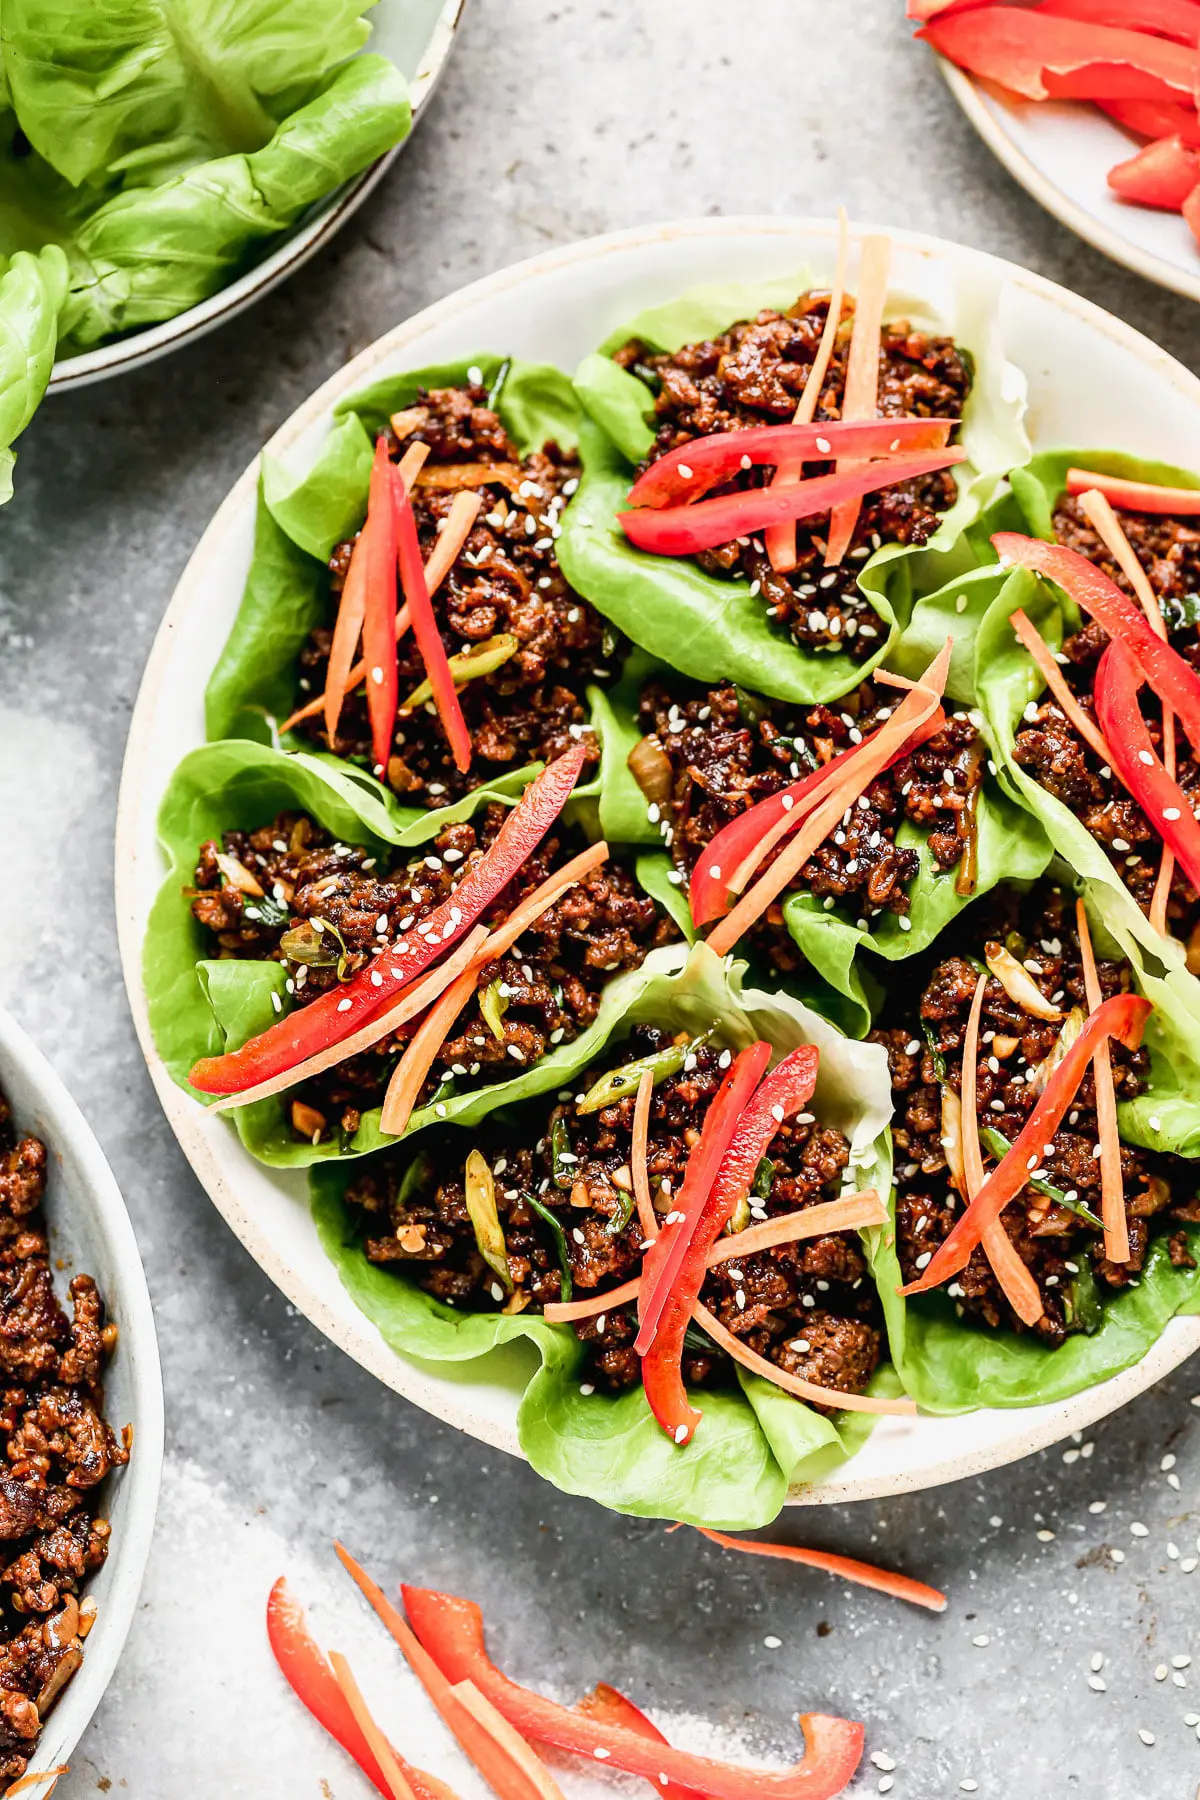 Ultra crispy and smothered in a soy-based sauce studded with rich brown sugar, sweet mirin wine, and brimming with heat from Sambal Oelek, these Beef Lettuce Wraps are my new favorite way to do lettuce. With easy-to-find ingredients, and minimal prep and cook time, they're also the perfect way to get dinner on the table without  much effort. 